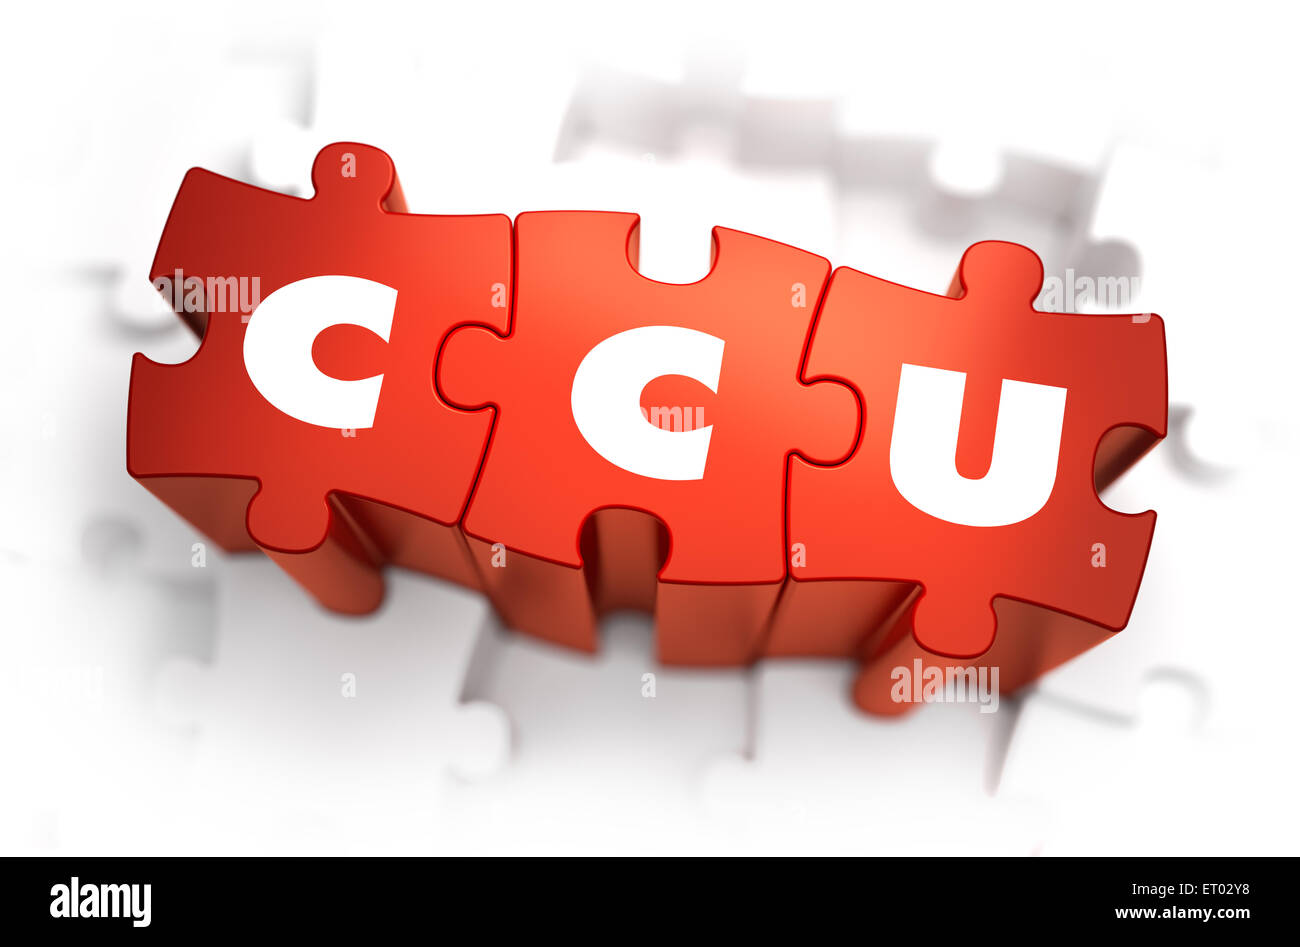 Word - CCU on Red Puzzle. Stock Photo